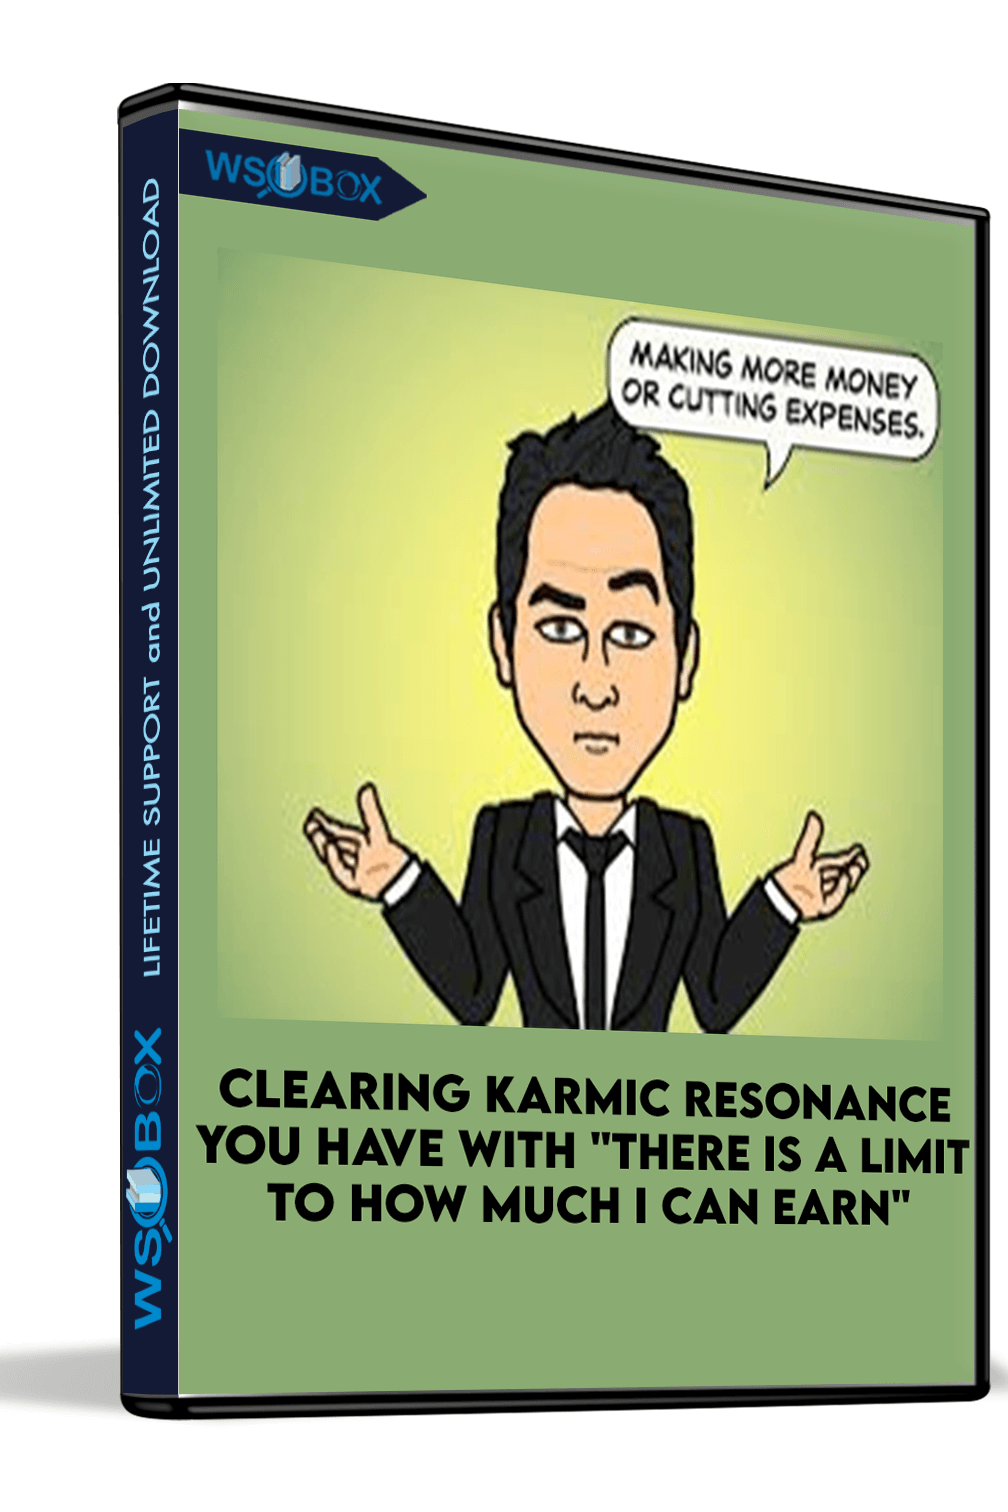 Clearing Karmic Resonance You Have With “There is a limit to how much I can earn”